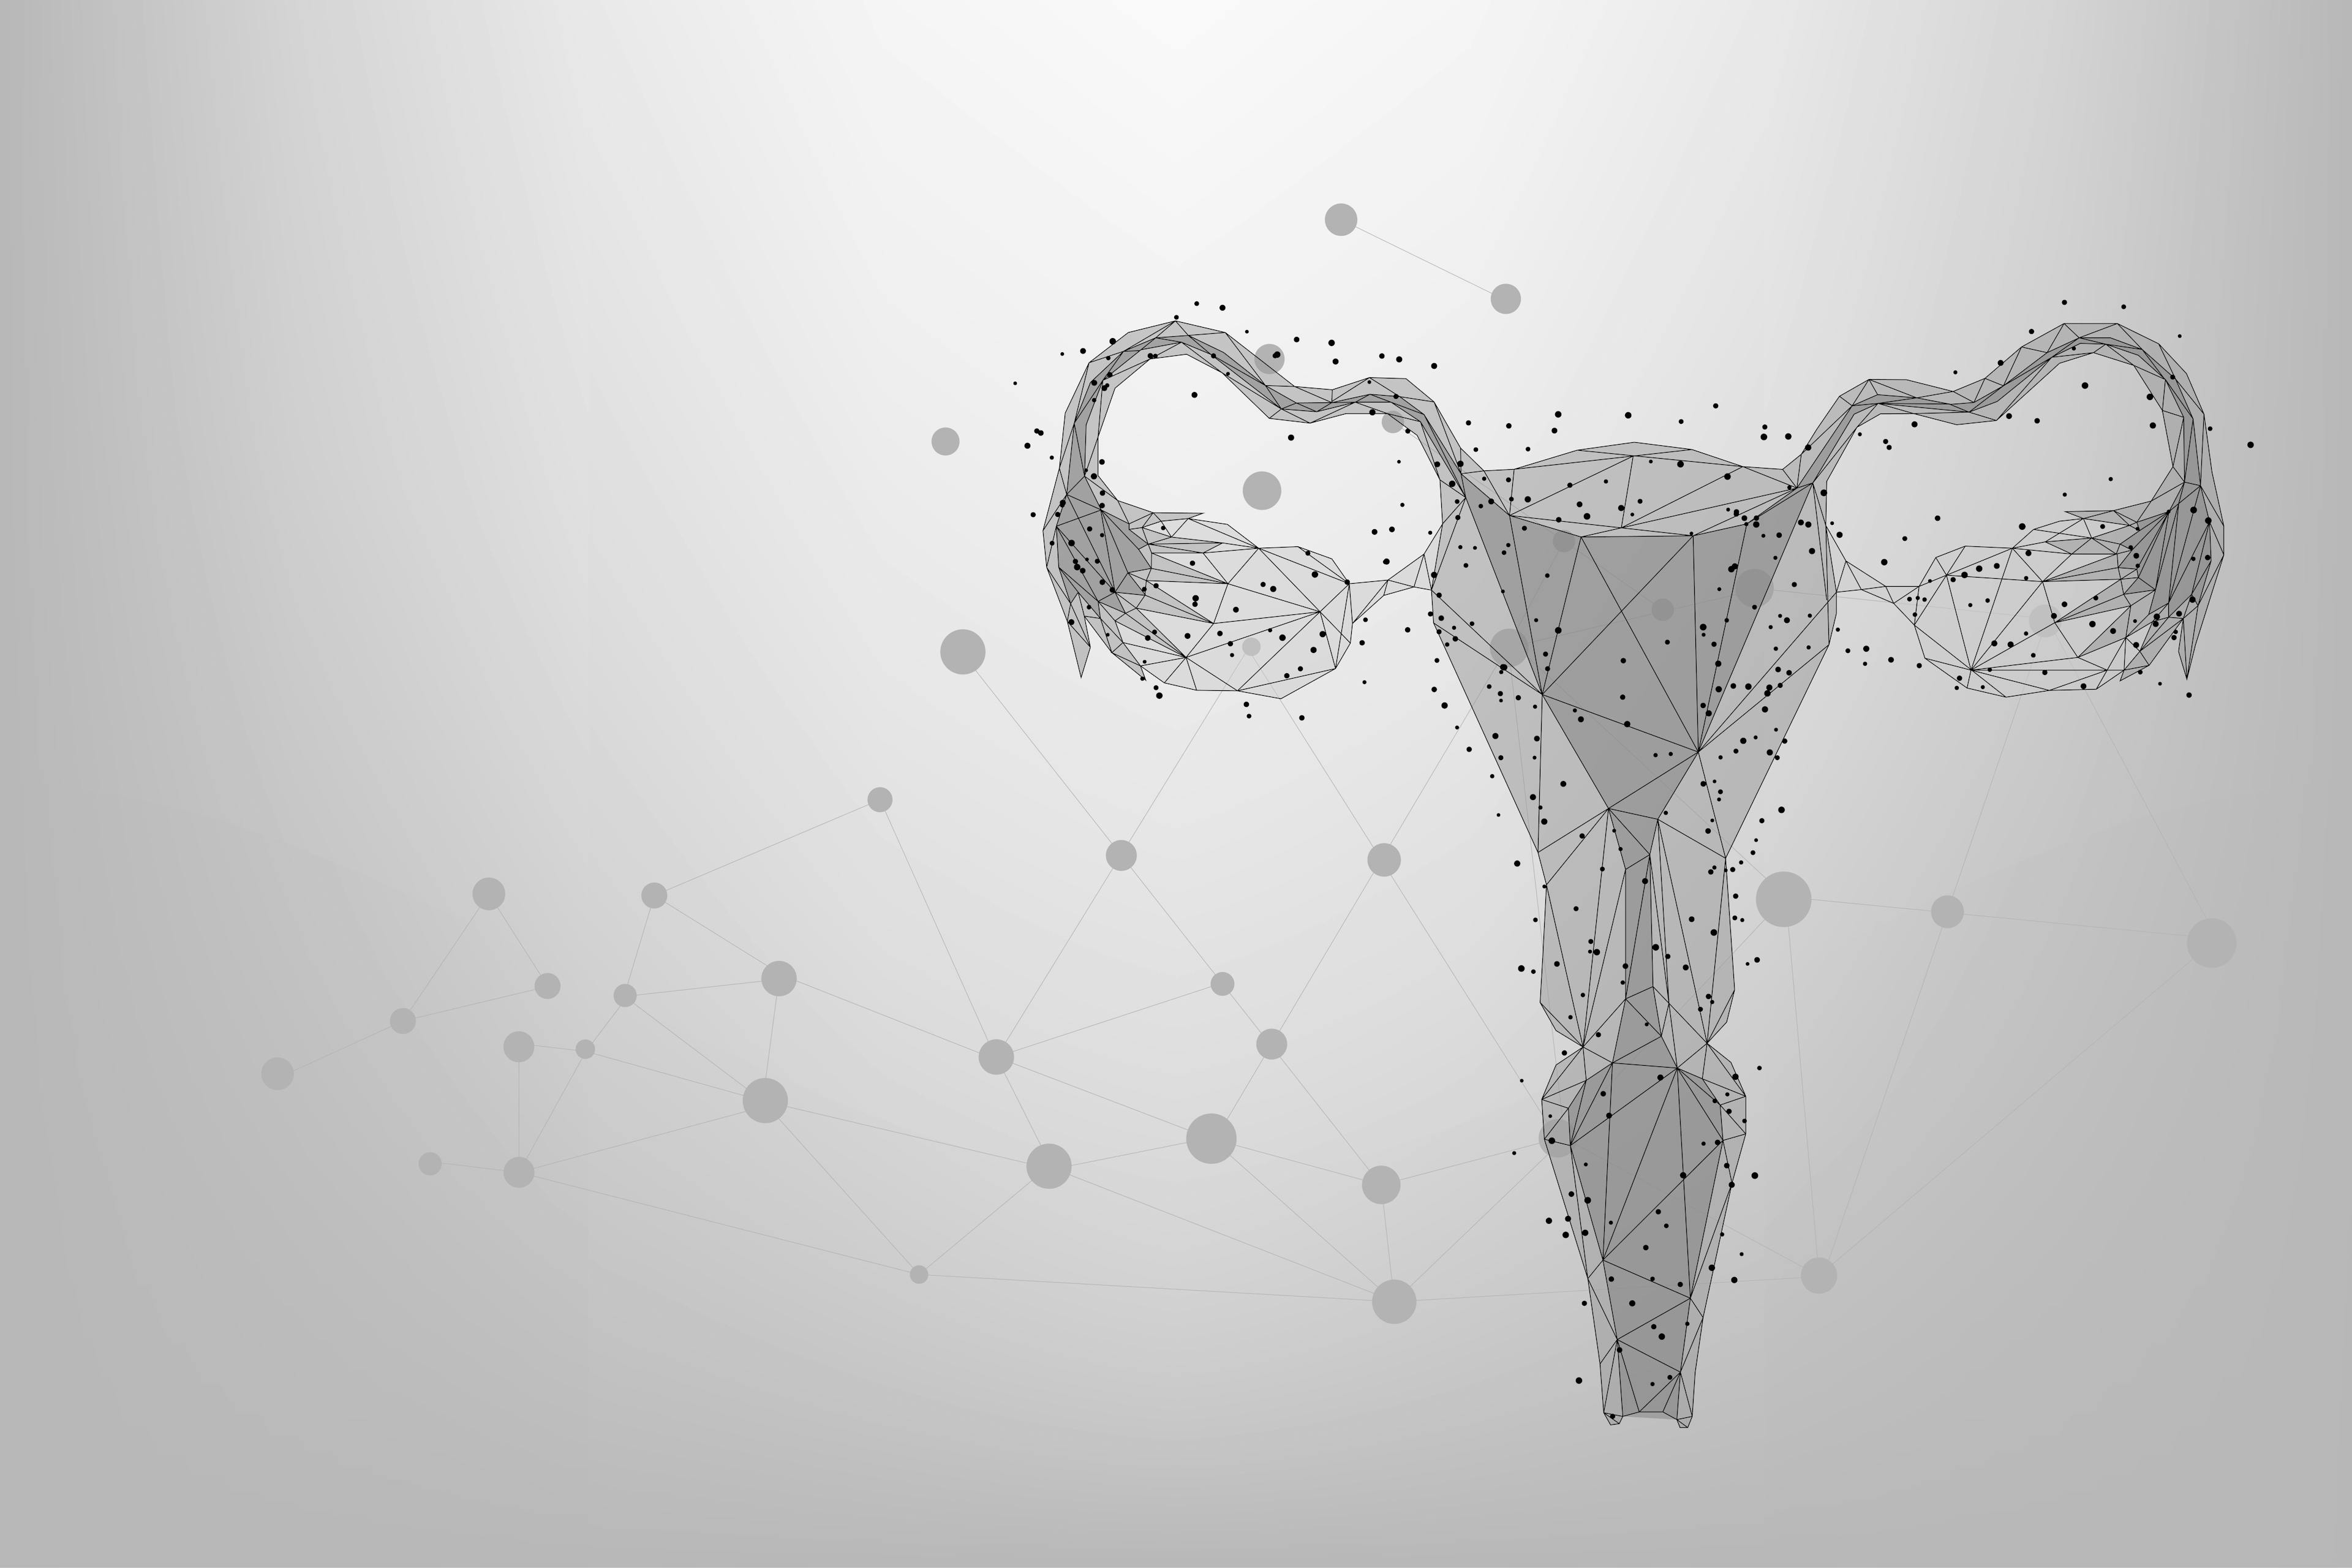 Abstract mesh line and point Ovaries. Low poly female reproductive organs uterus and ovaries health care. Polygonal illustration | Image Credit: © Brazhyk - stock.adobe.com